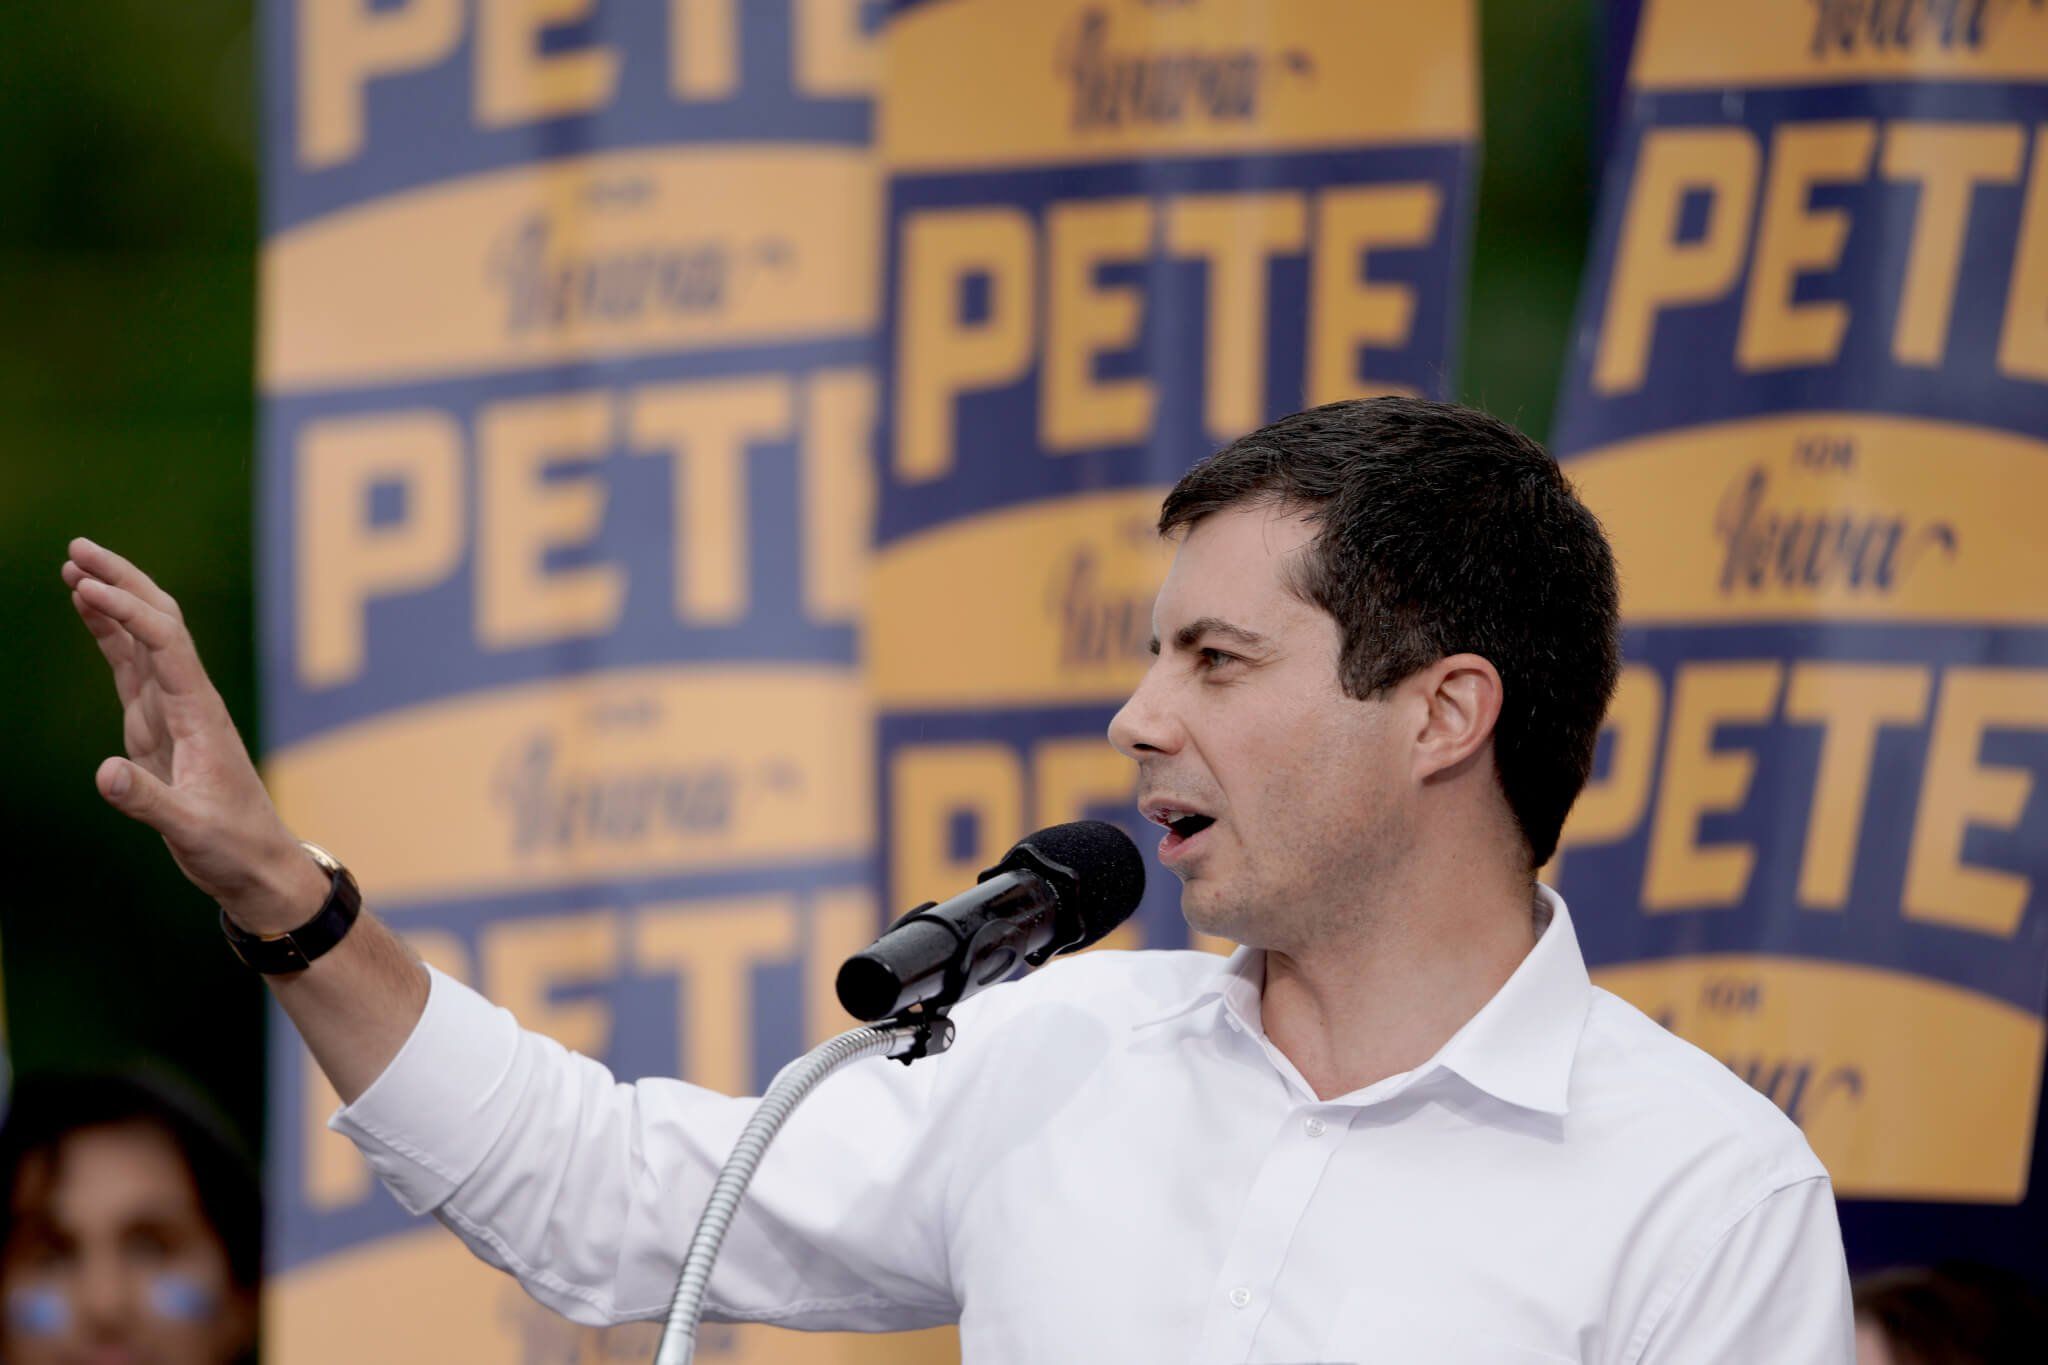 Democratic presidential candidate and South Bend Mayor Pete Buttigieg speaks at the Polk County Democrats Steak Fry, in Des Moines, Iowa,, Sept. 21, 2019. (AP Photo/Nati Harnik)